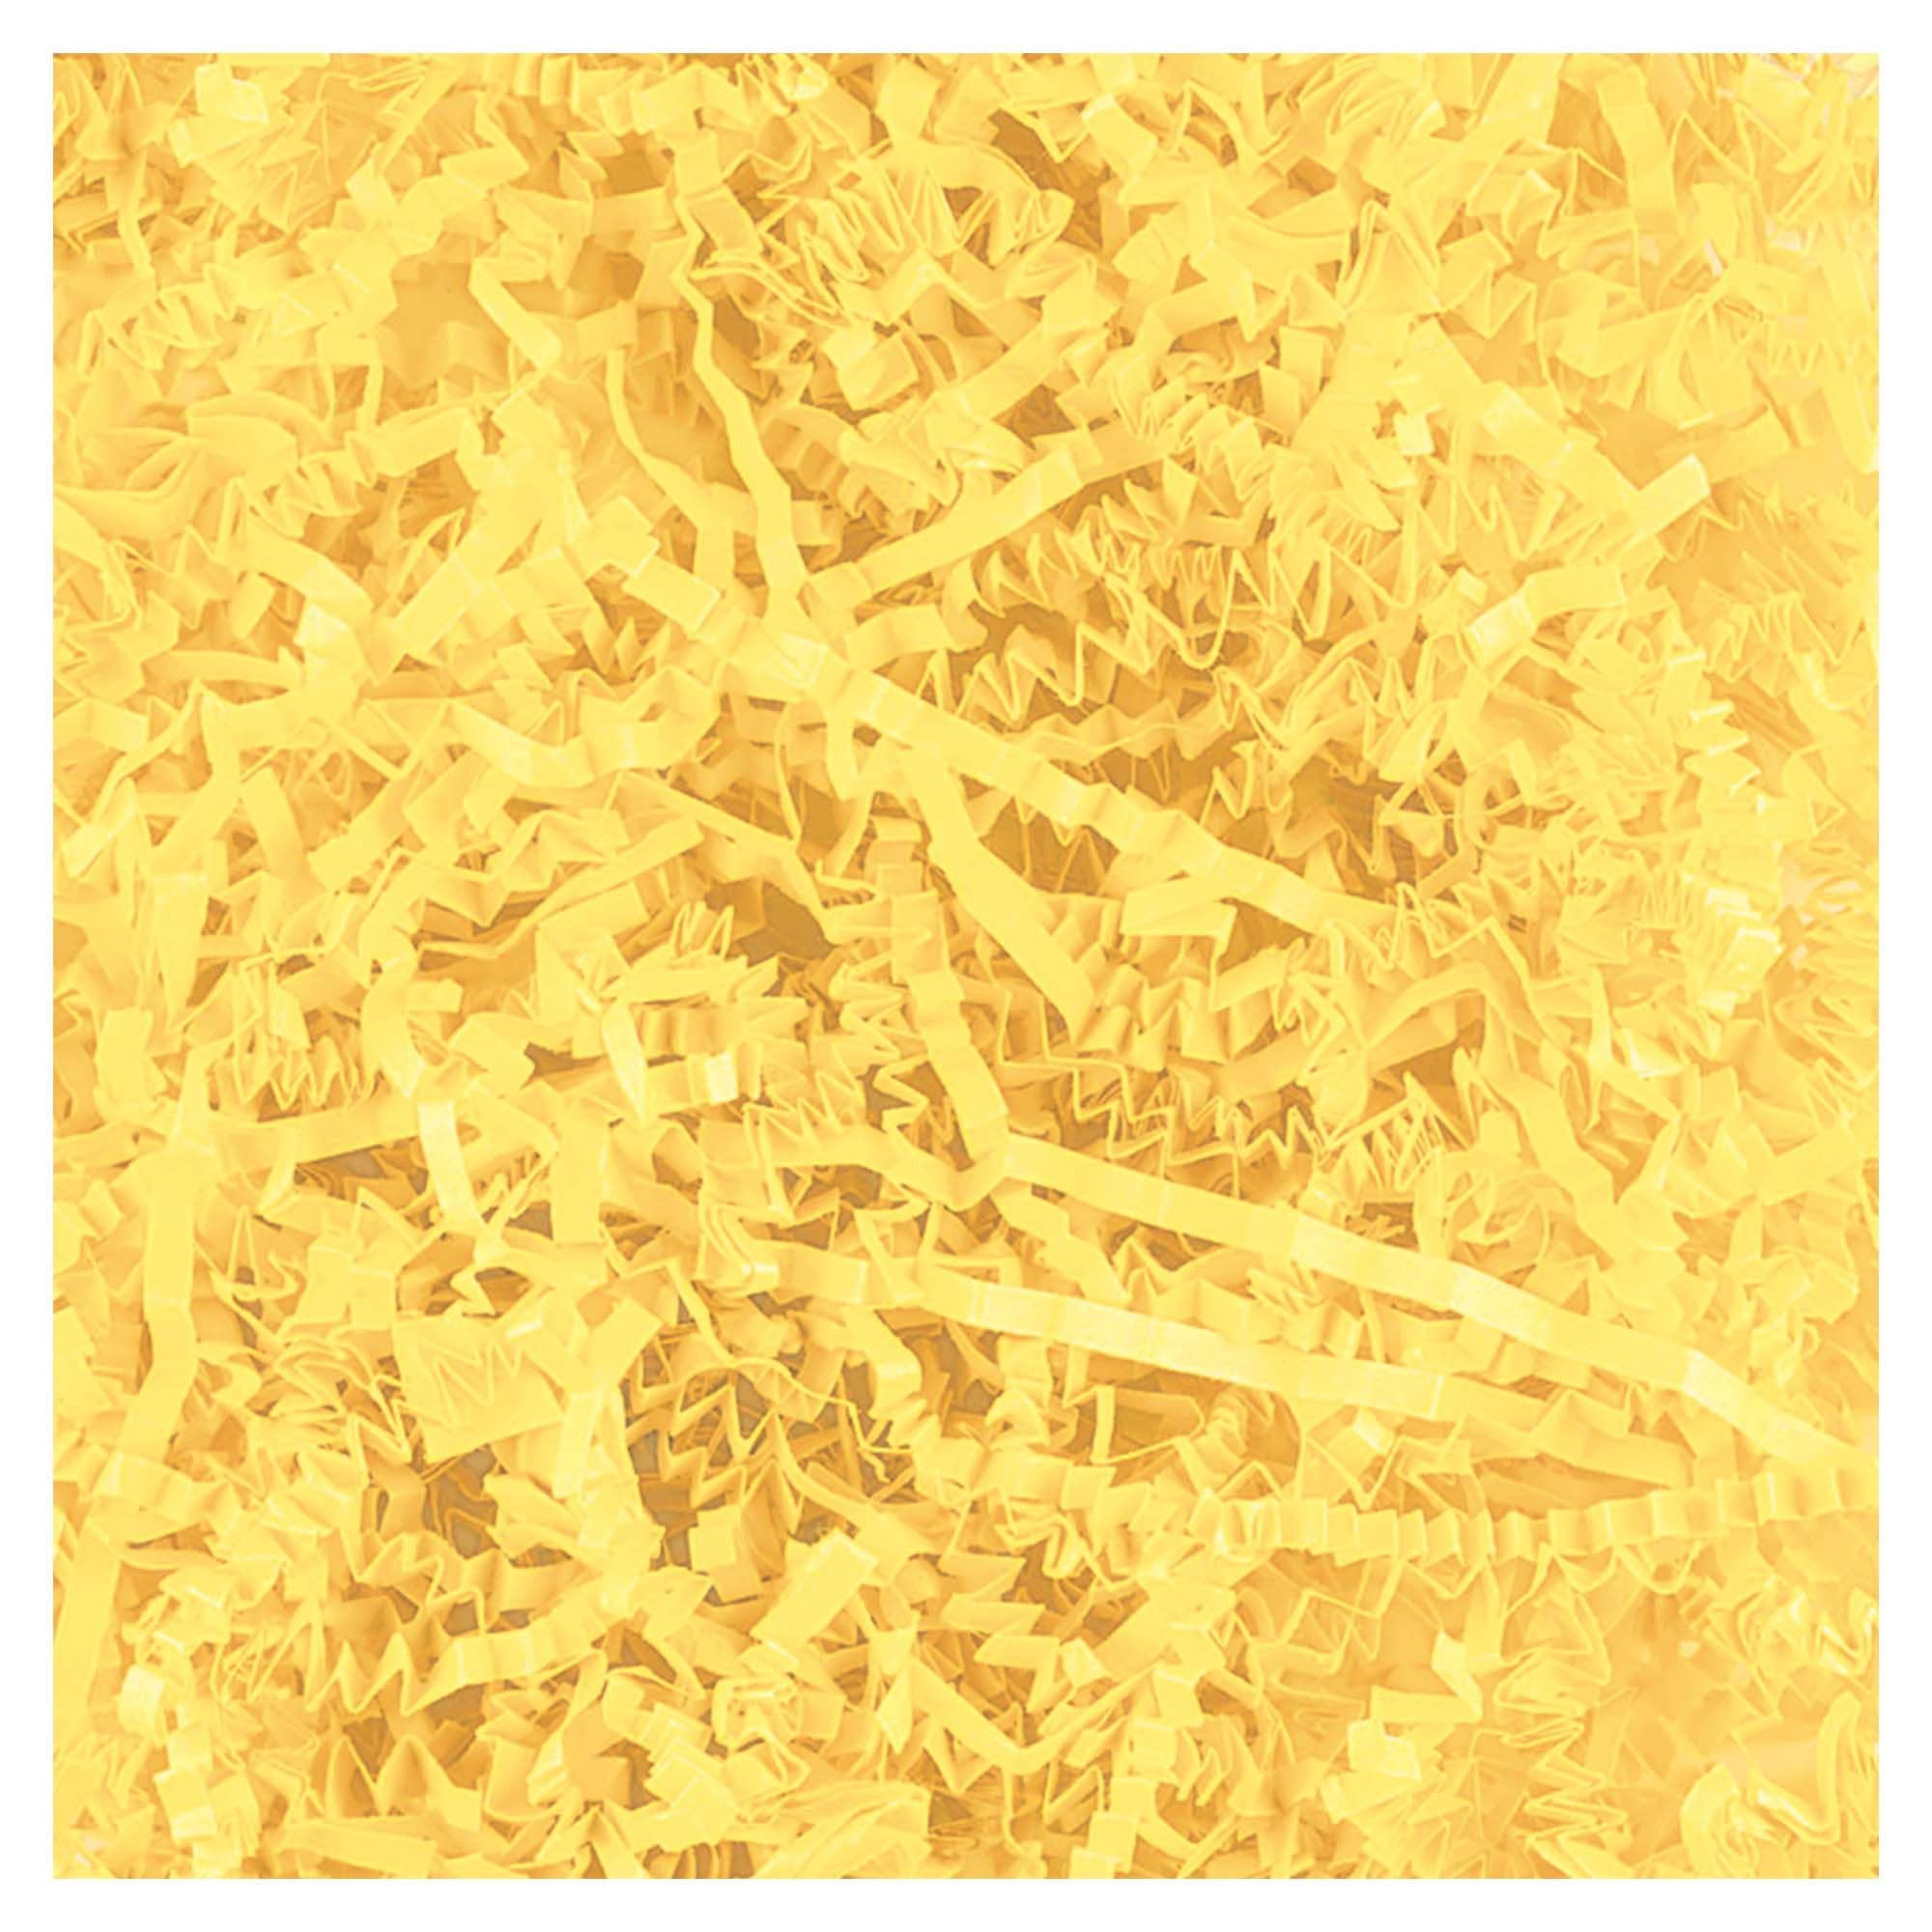 Vibrant Yellow Paper Shreds - 2oz., 1 Pack - Perfect for Gift Packaging, Decorations and Craft Projects